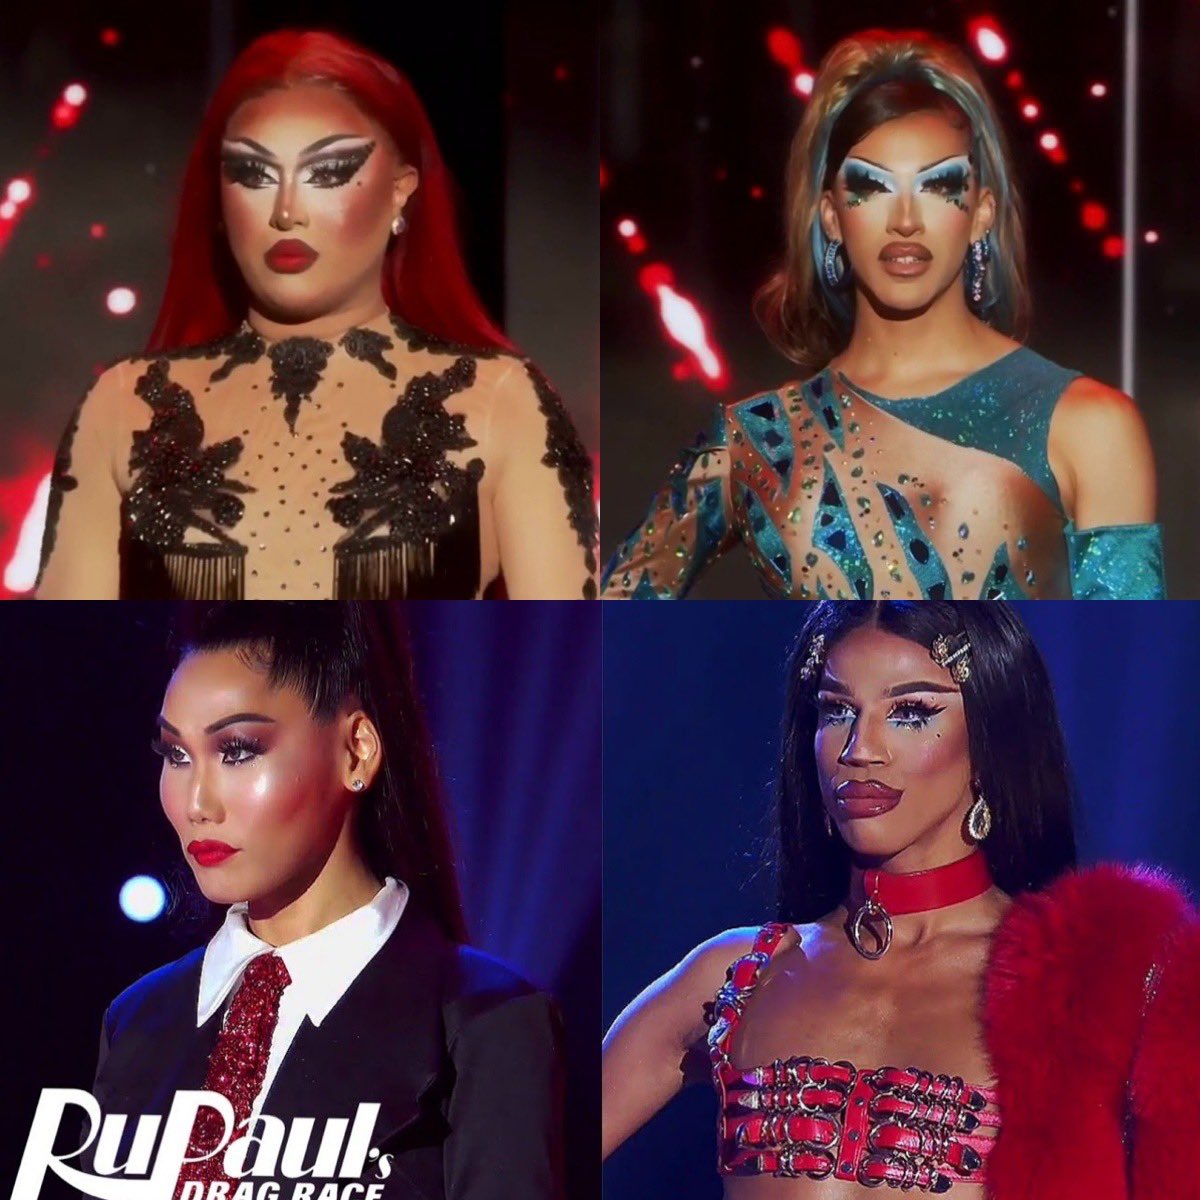 the cuntiest lip-syncs of the franchise #dragrace